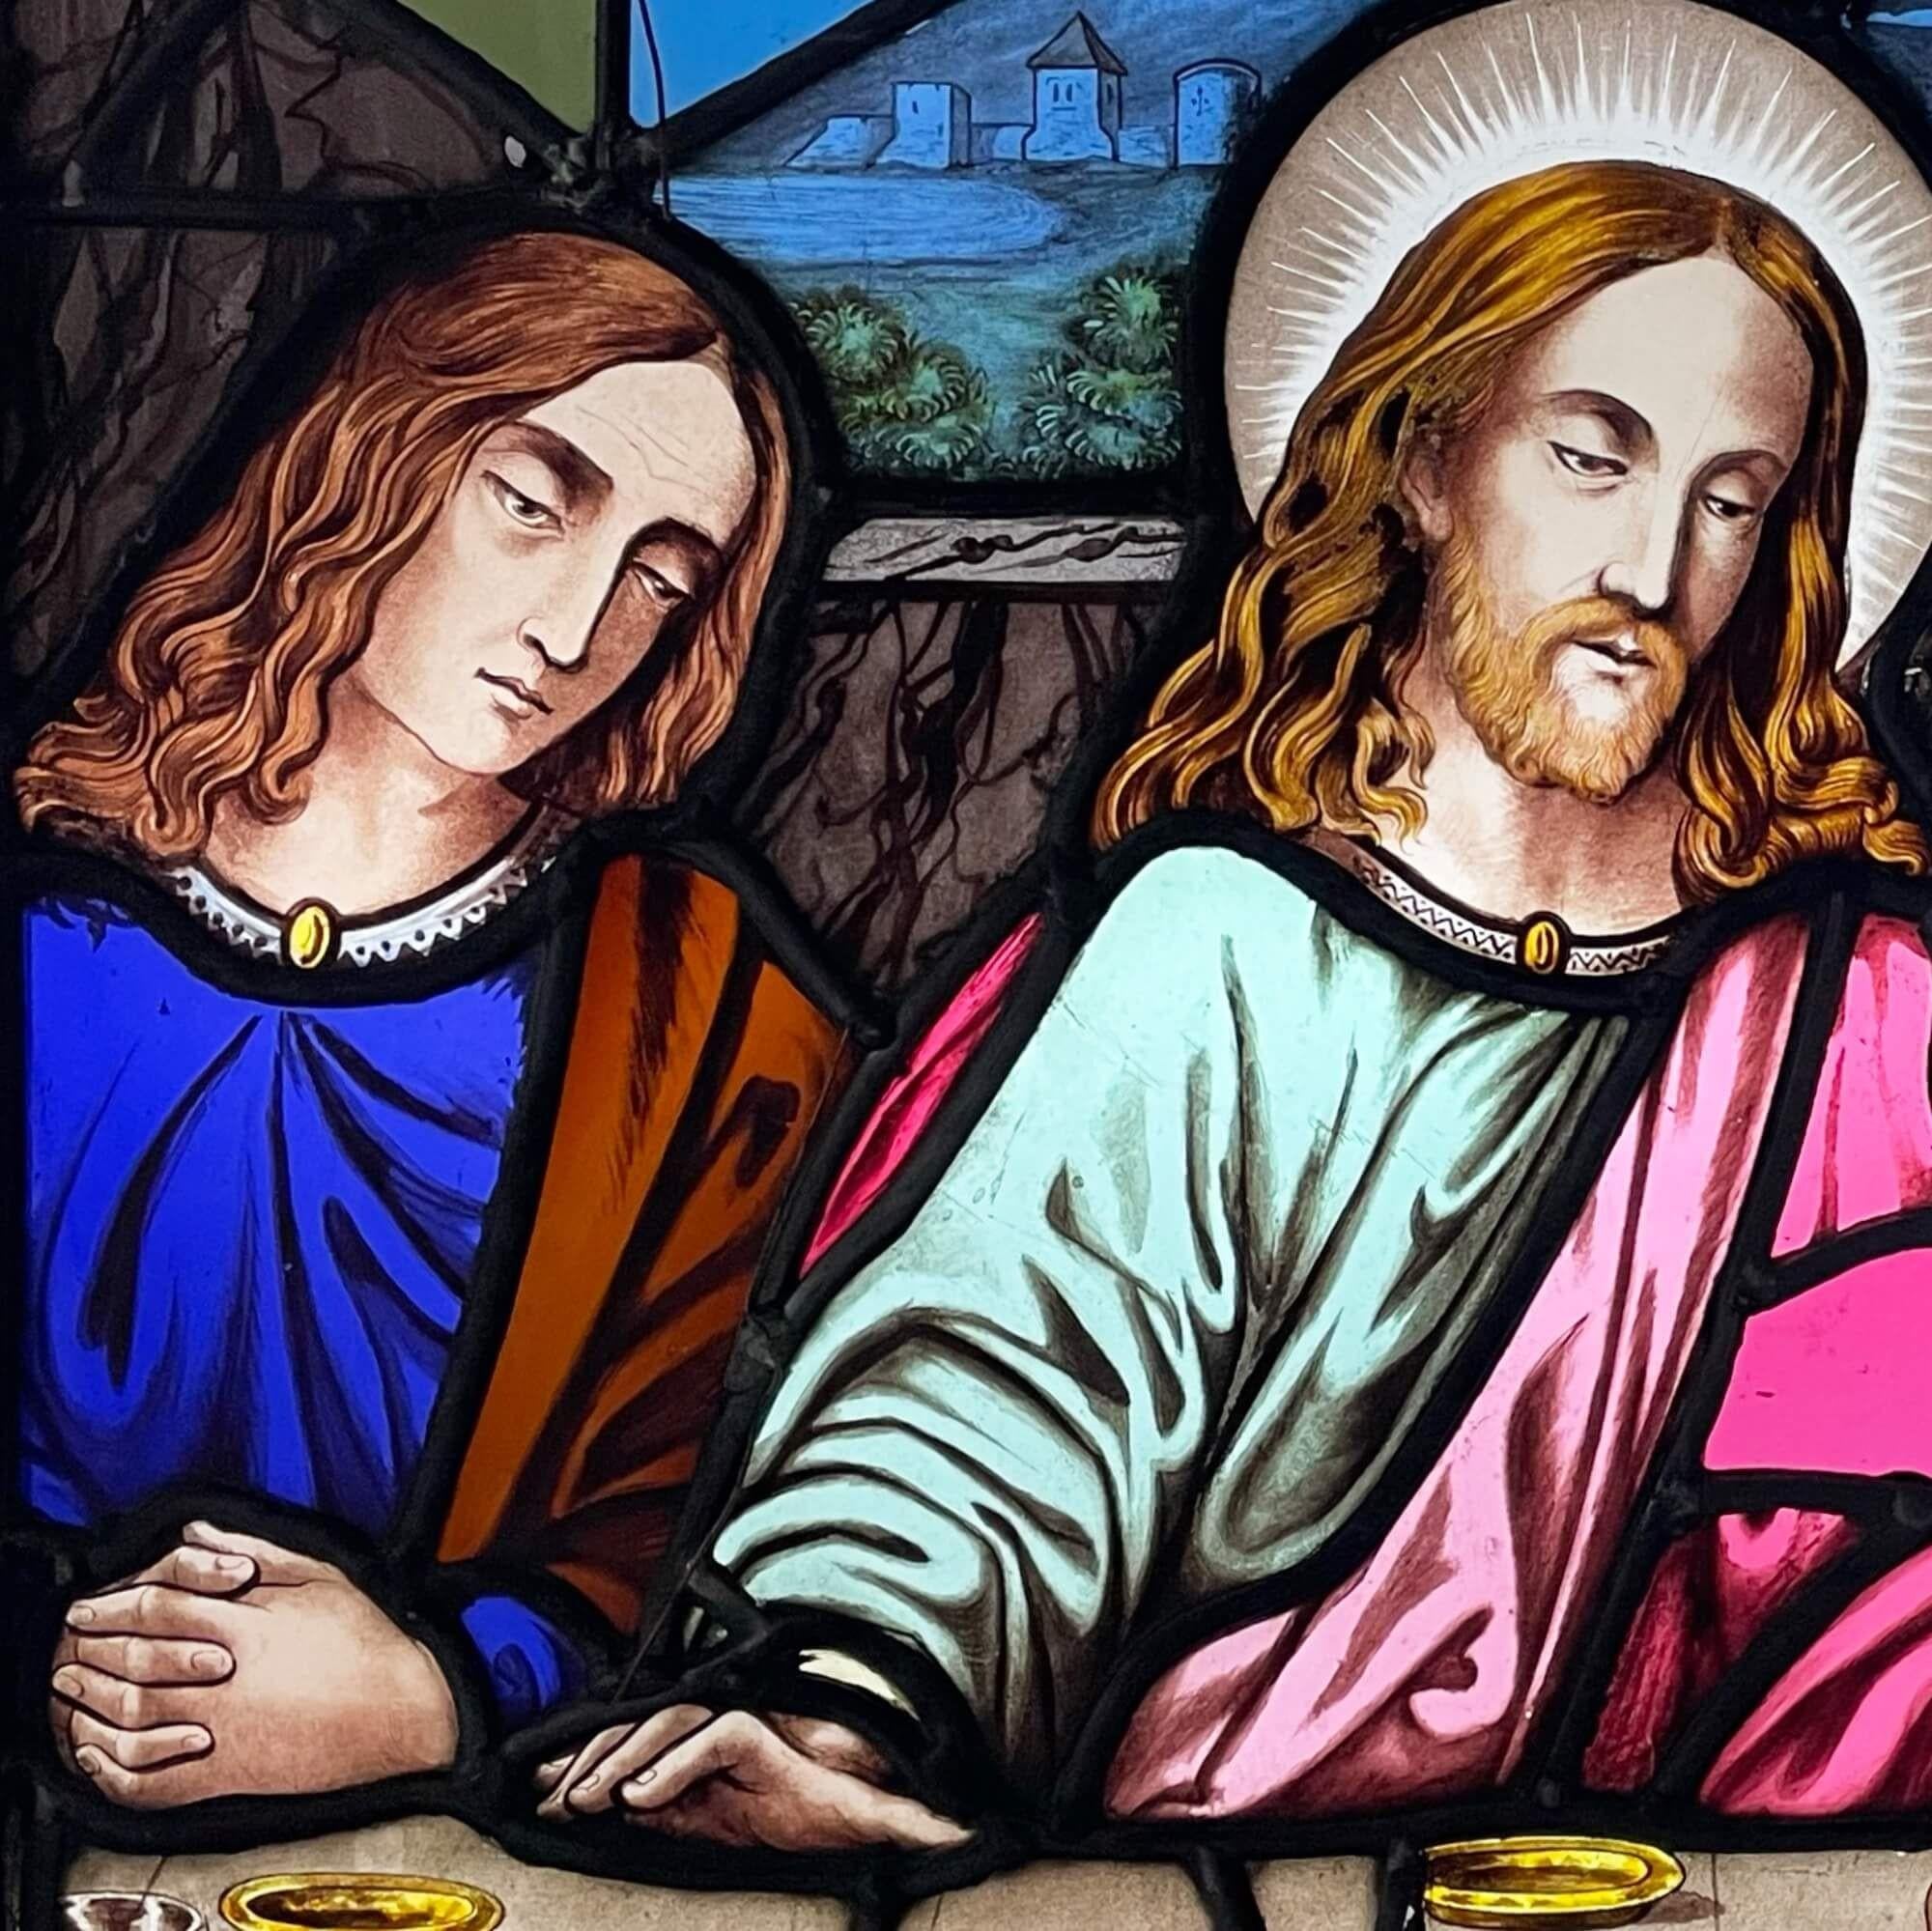 A stained glass window depicting a part of Leonardo Da Vinci’s Last Supper scene. A stunning late 19th century colourful take on the famous religious painting. This ecclesiastical style window would look beautiful with light shining through into a